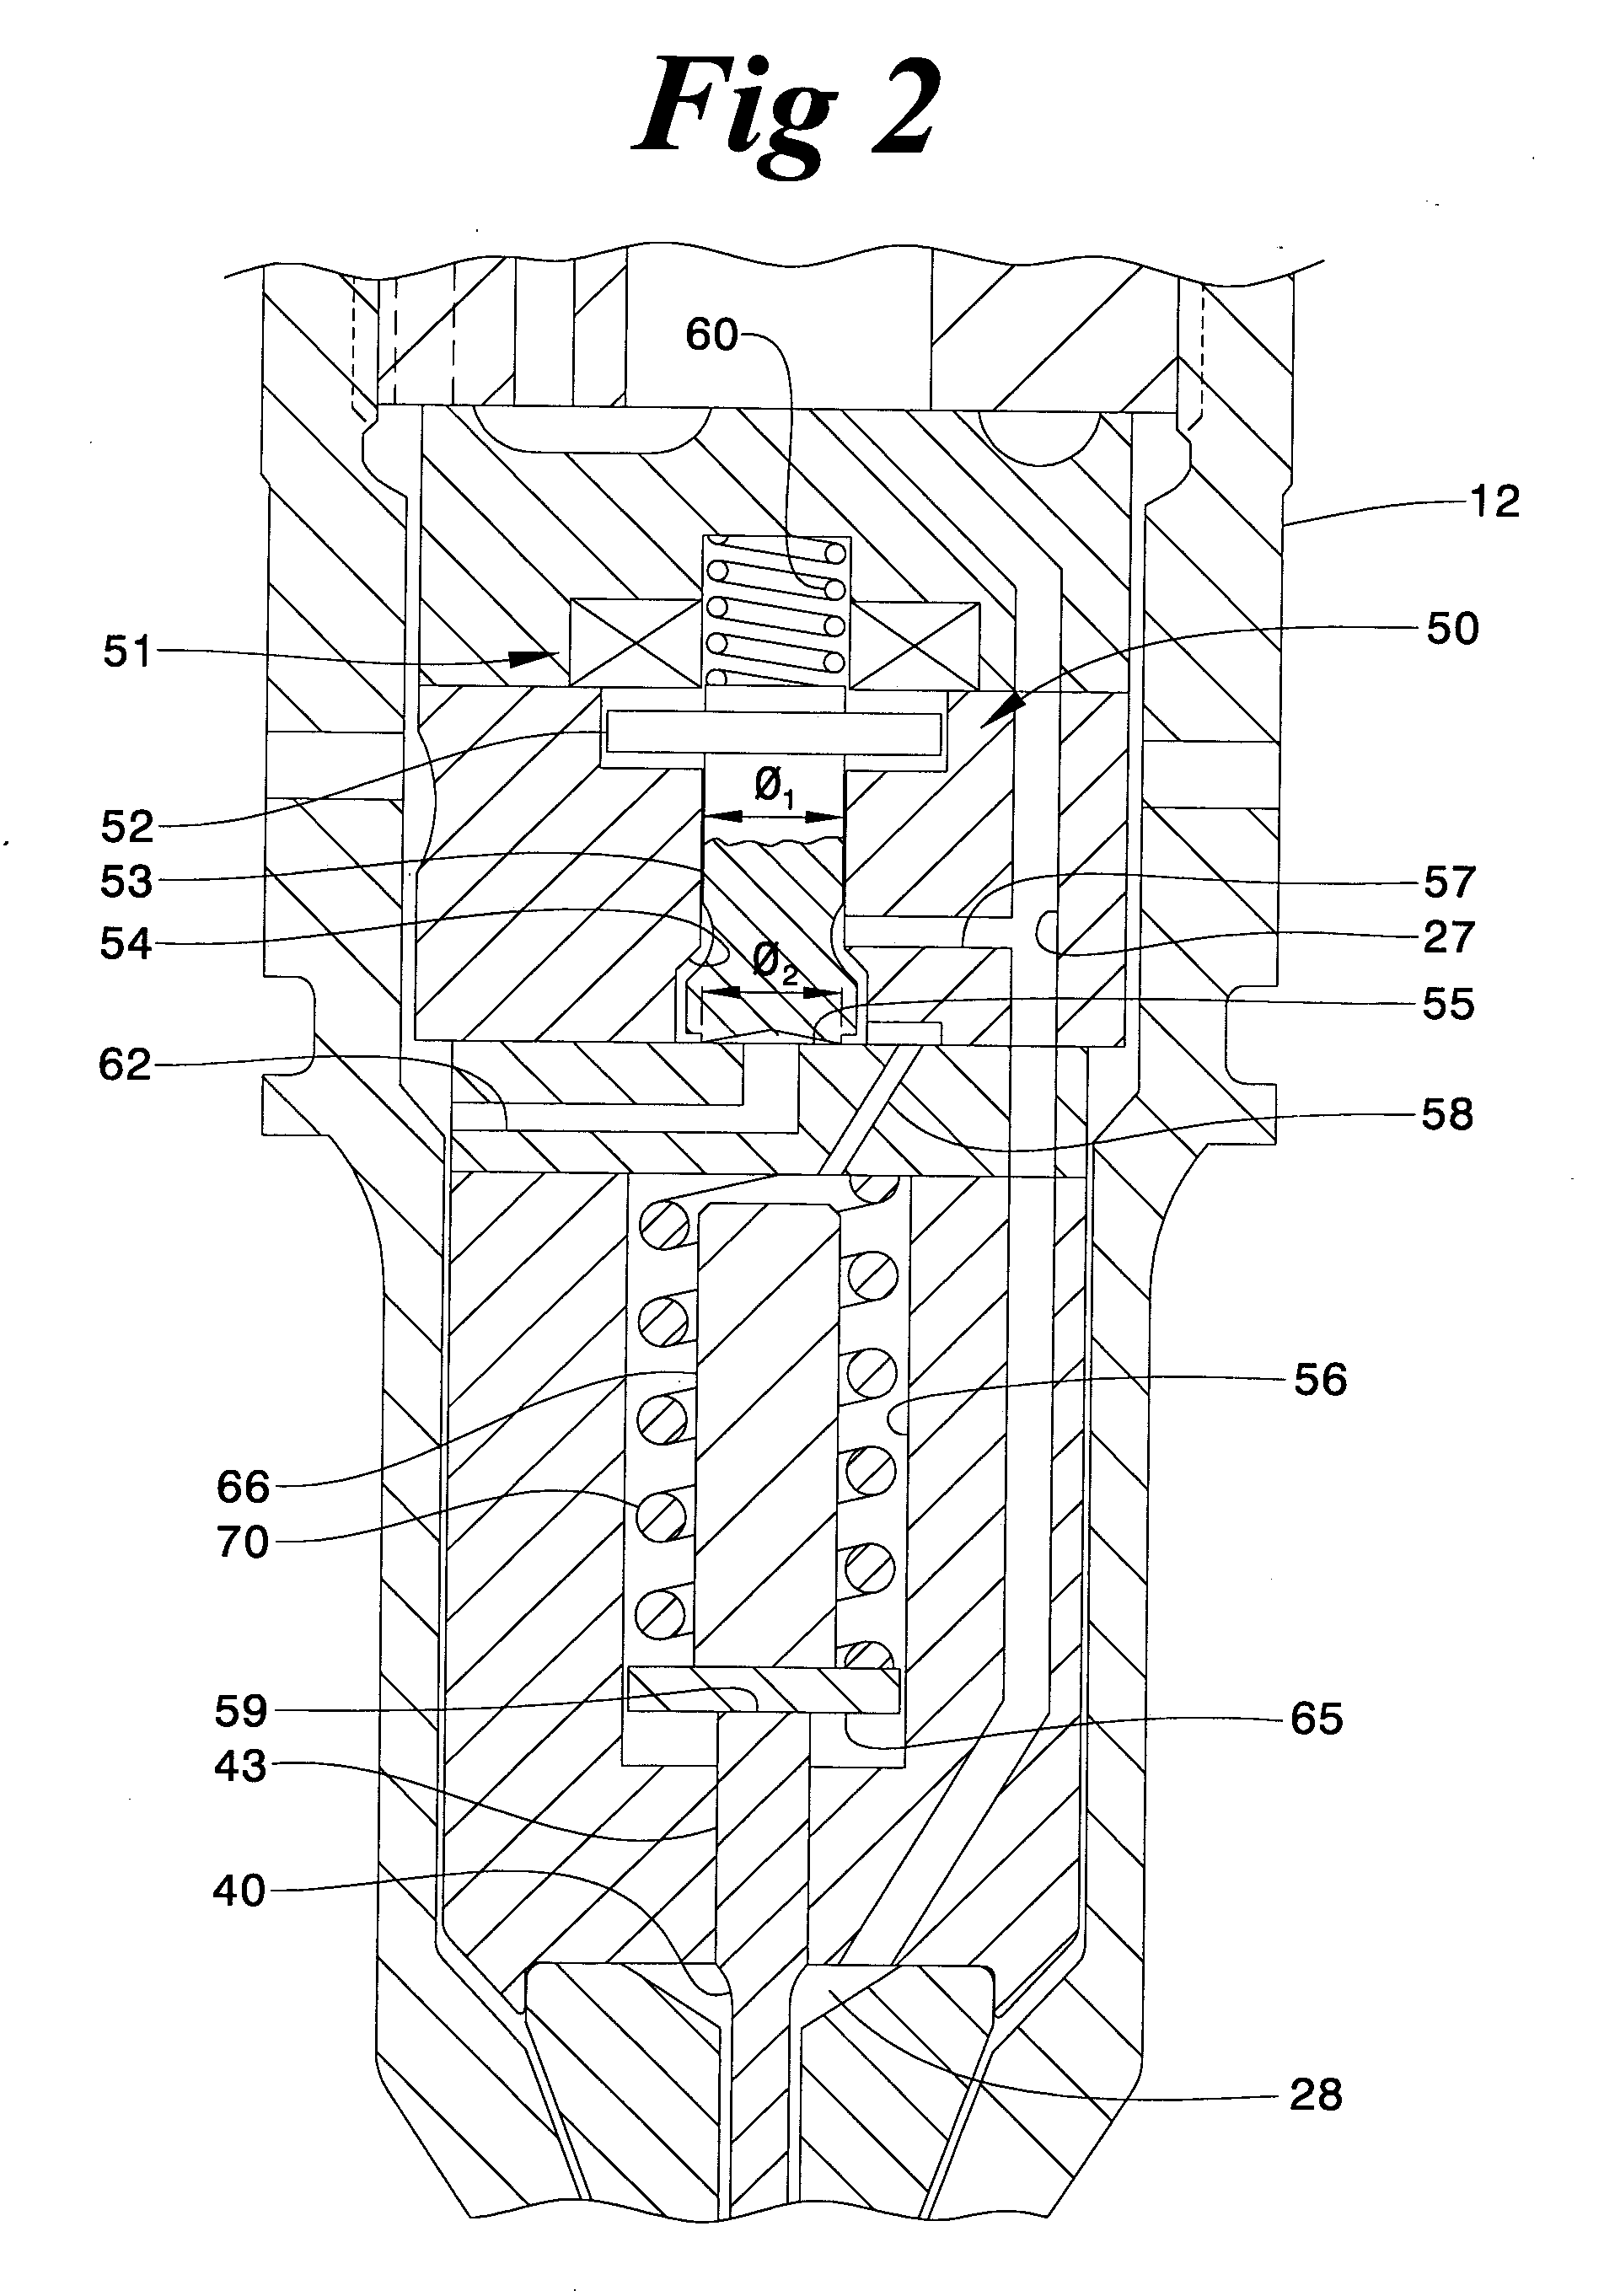 Electronic unit injector with pressure assisted needle control